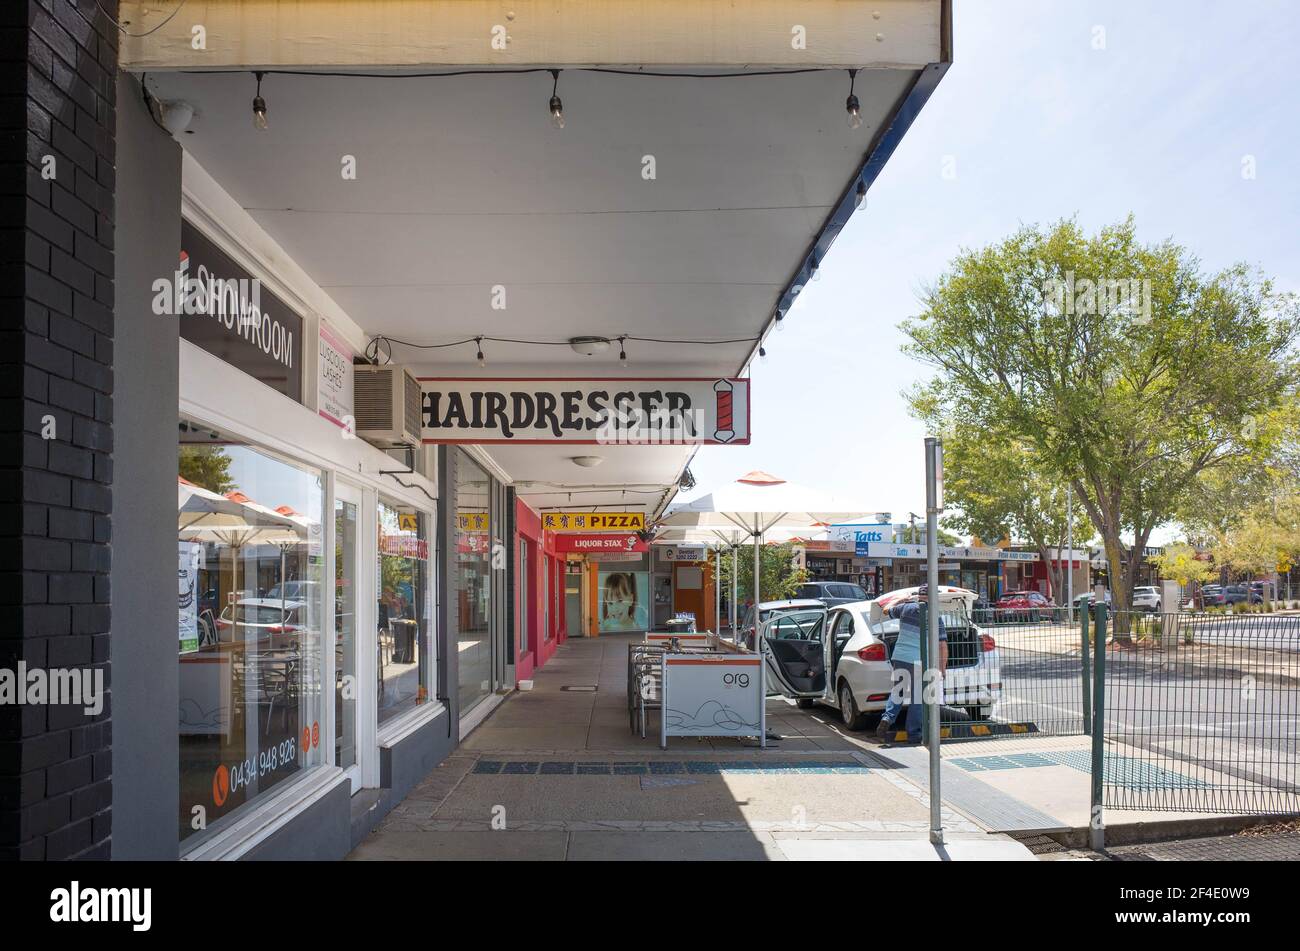 The local shops along the street in Lara's town center. Lara is a small town in Victoria, Australia. Stock Photo